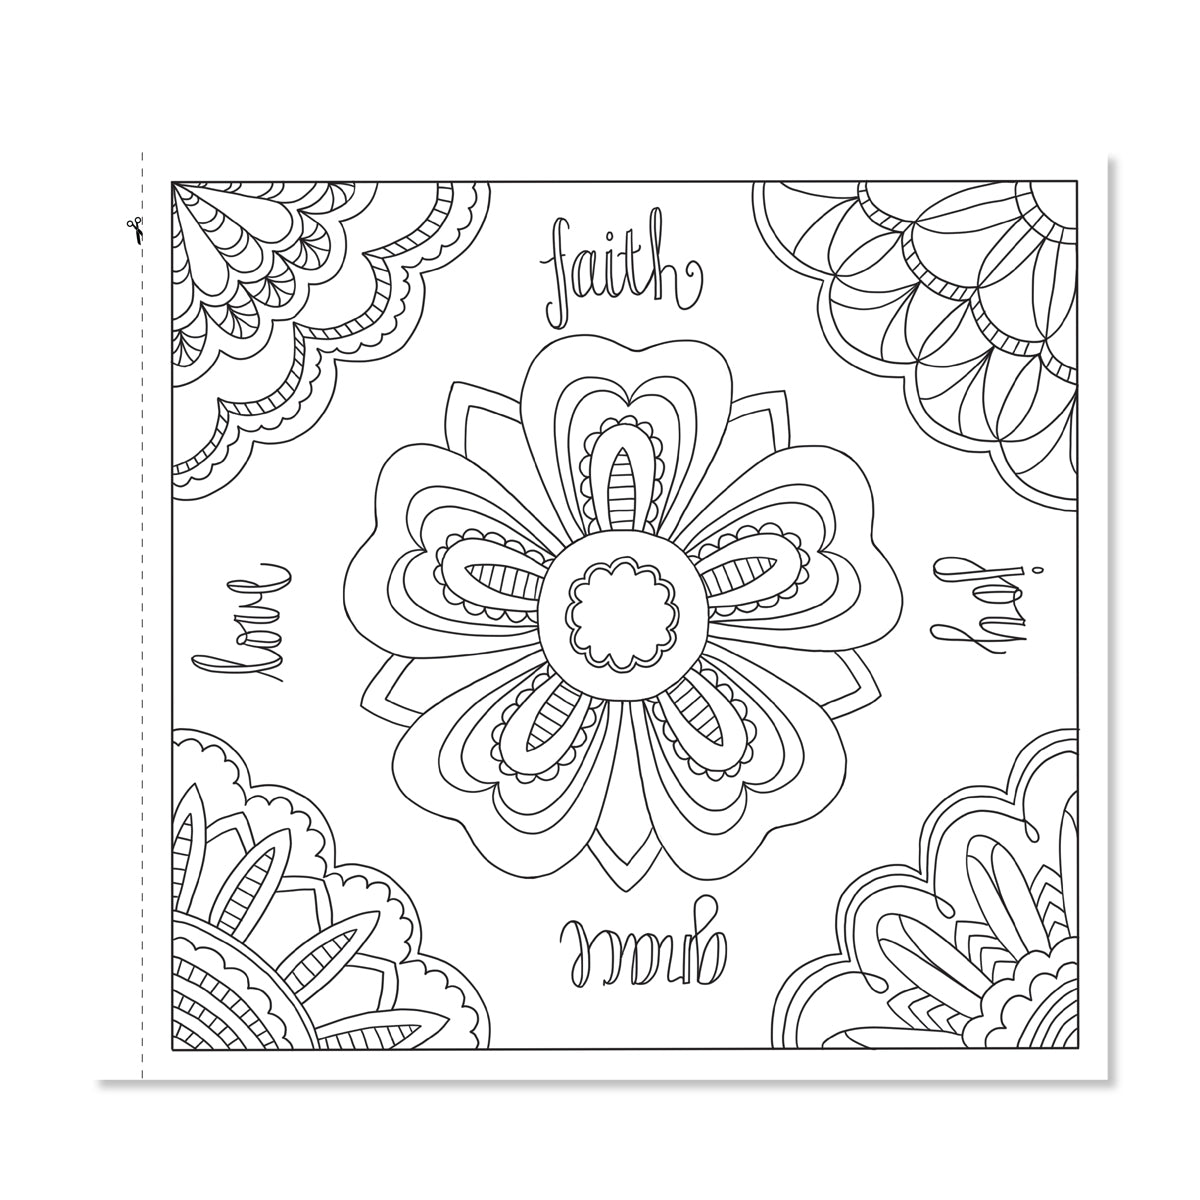 Adult Coloring Books Super Set -- 10 Deluxe Coloring Books for Adults and  Teens